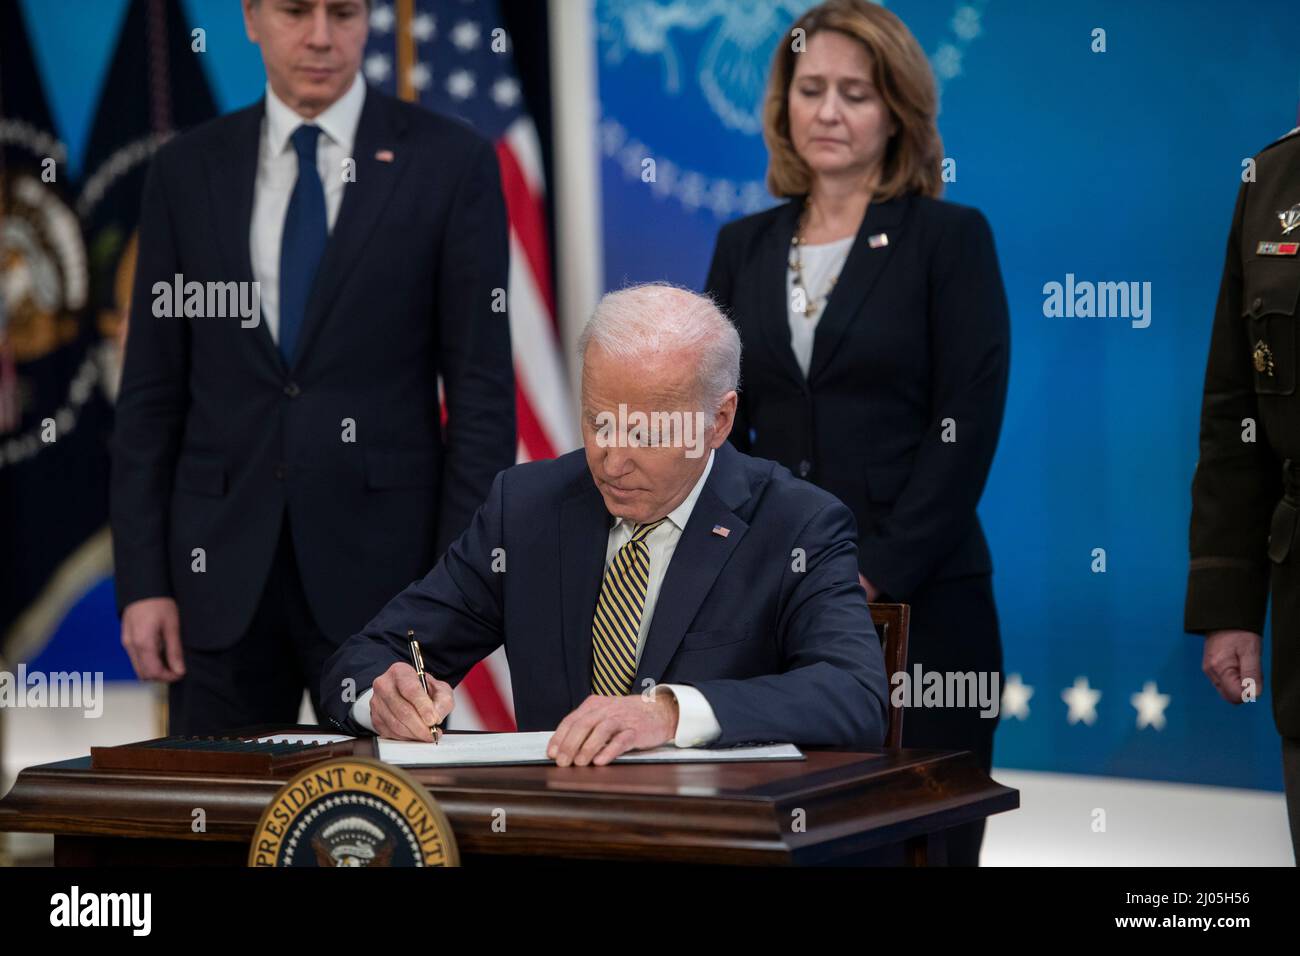 United States President Joe Biden signs a bill for the assistance the United States is providing to Ukraine in the South Court Auditorium of the Eisenhower Executive Office Building on the White House Campus in Washington, DC, Wednesday, March 16, 2022. Credit: Rod Lamkey/CNP /MediaPunch Stock Photo